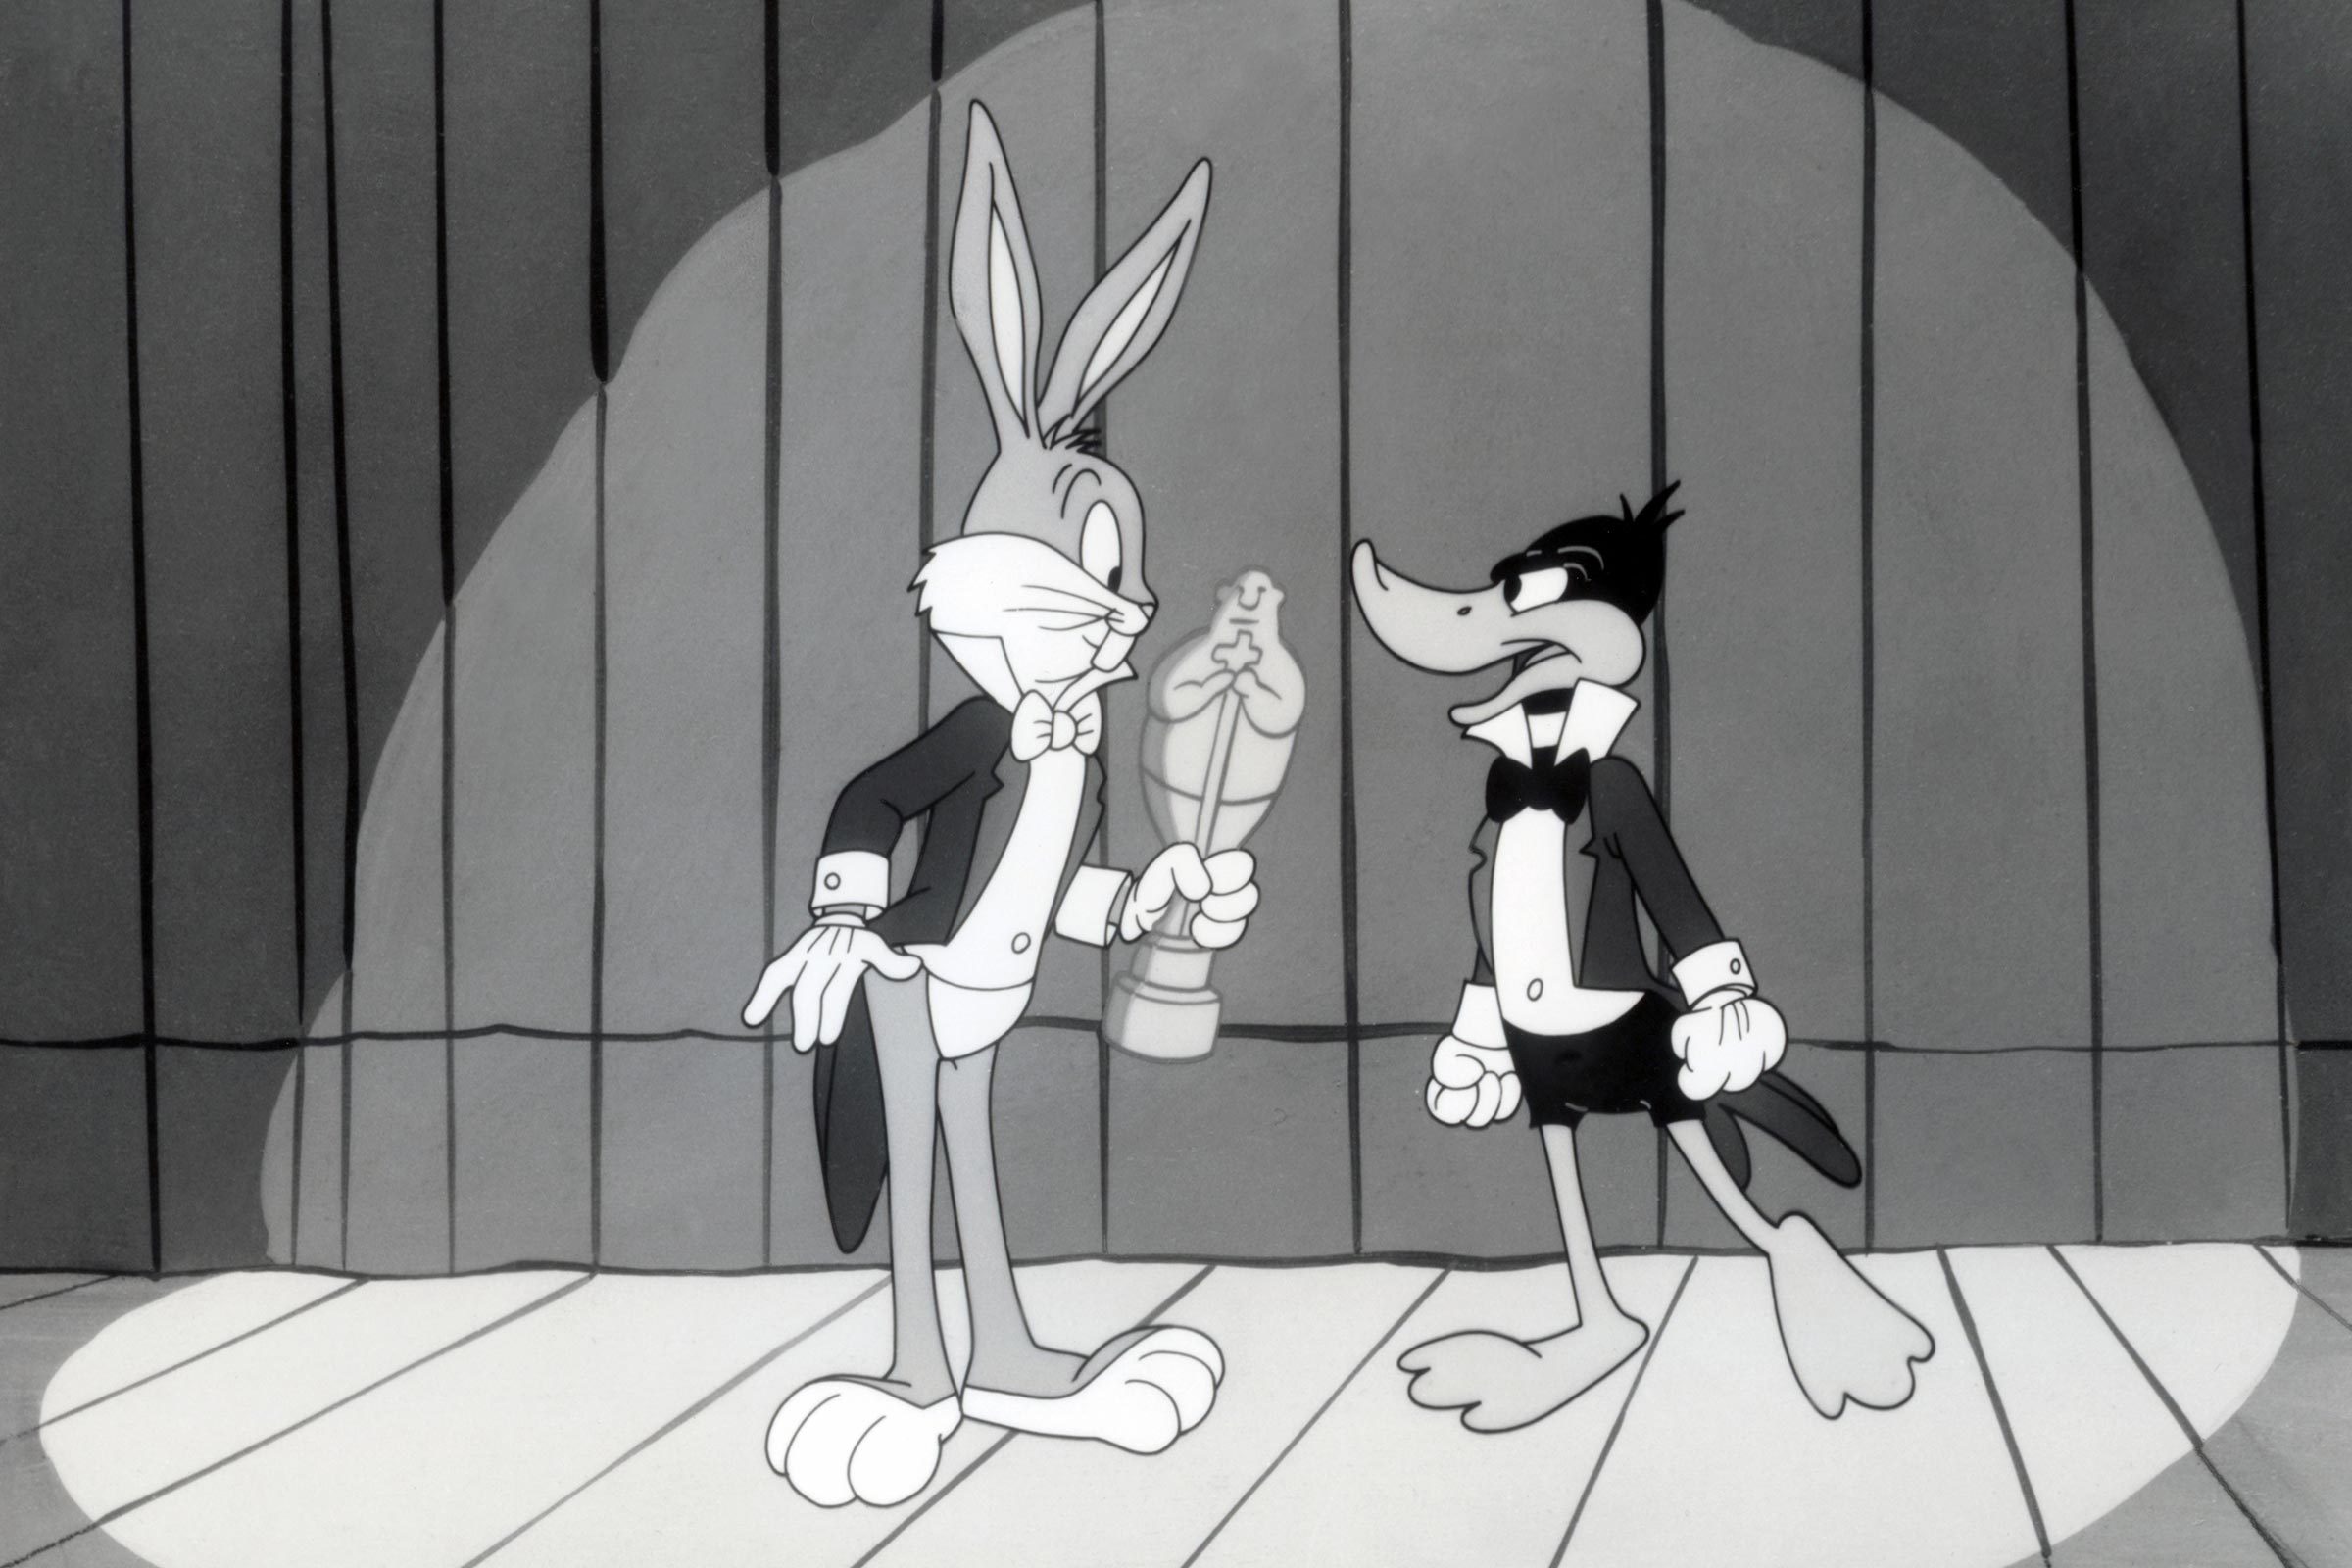 Porky Pig's Voice Actor Explains How Looney Tunes Got Its Name